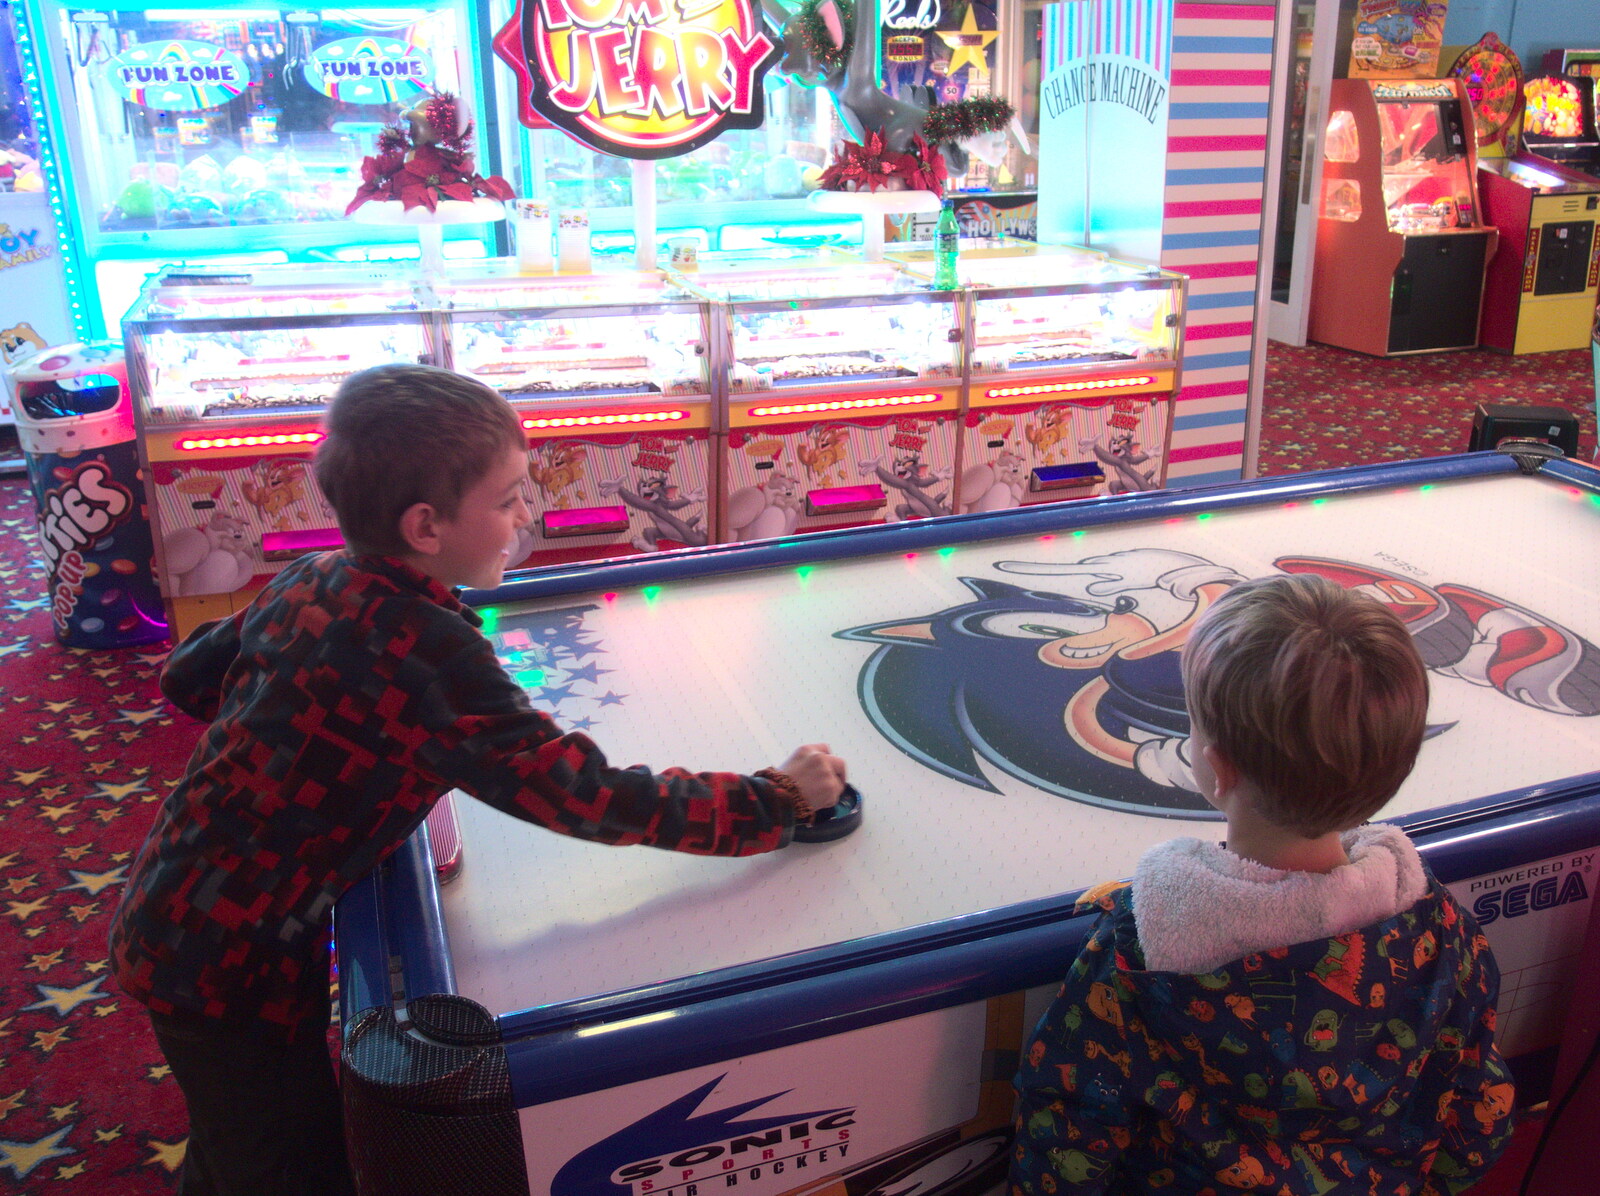 Fred's on the air hockey table from Southwold Seaside Pier, Southwold, Suffolk - 18th December 2016